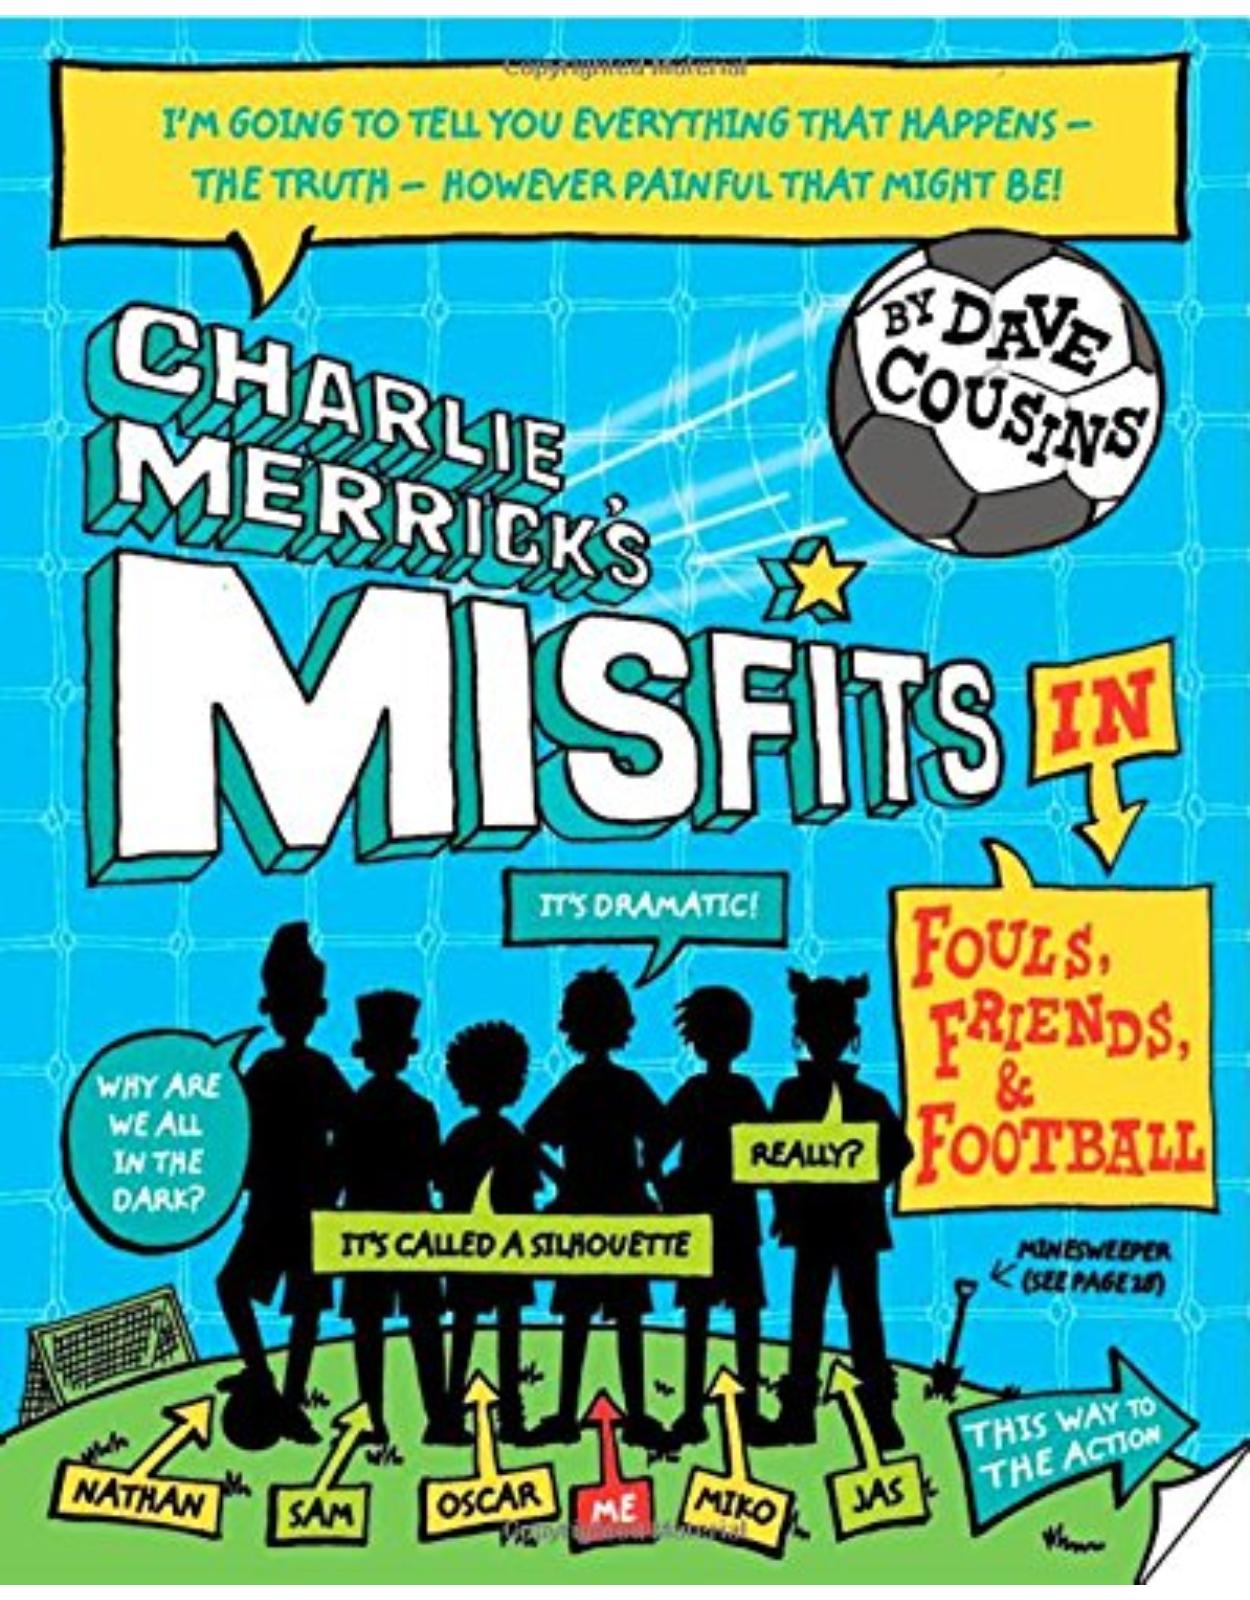 Charlie Merrick's Misfits in Fouls, Friends, and Football 